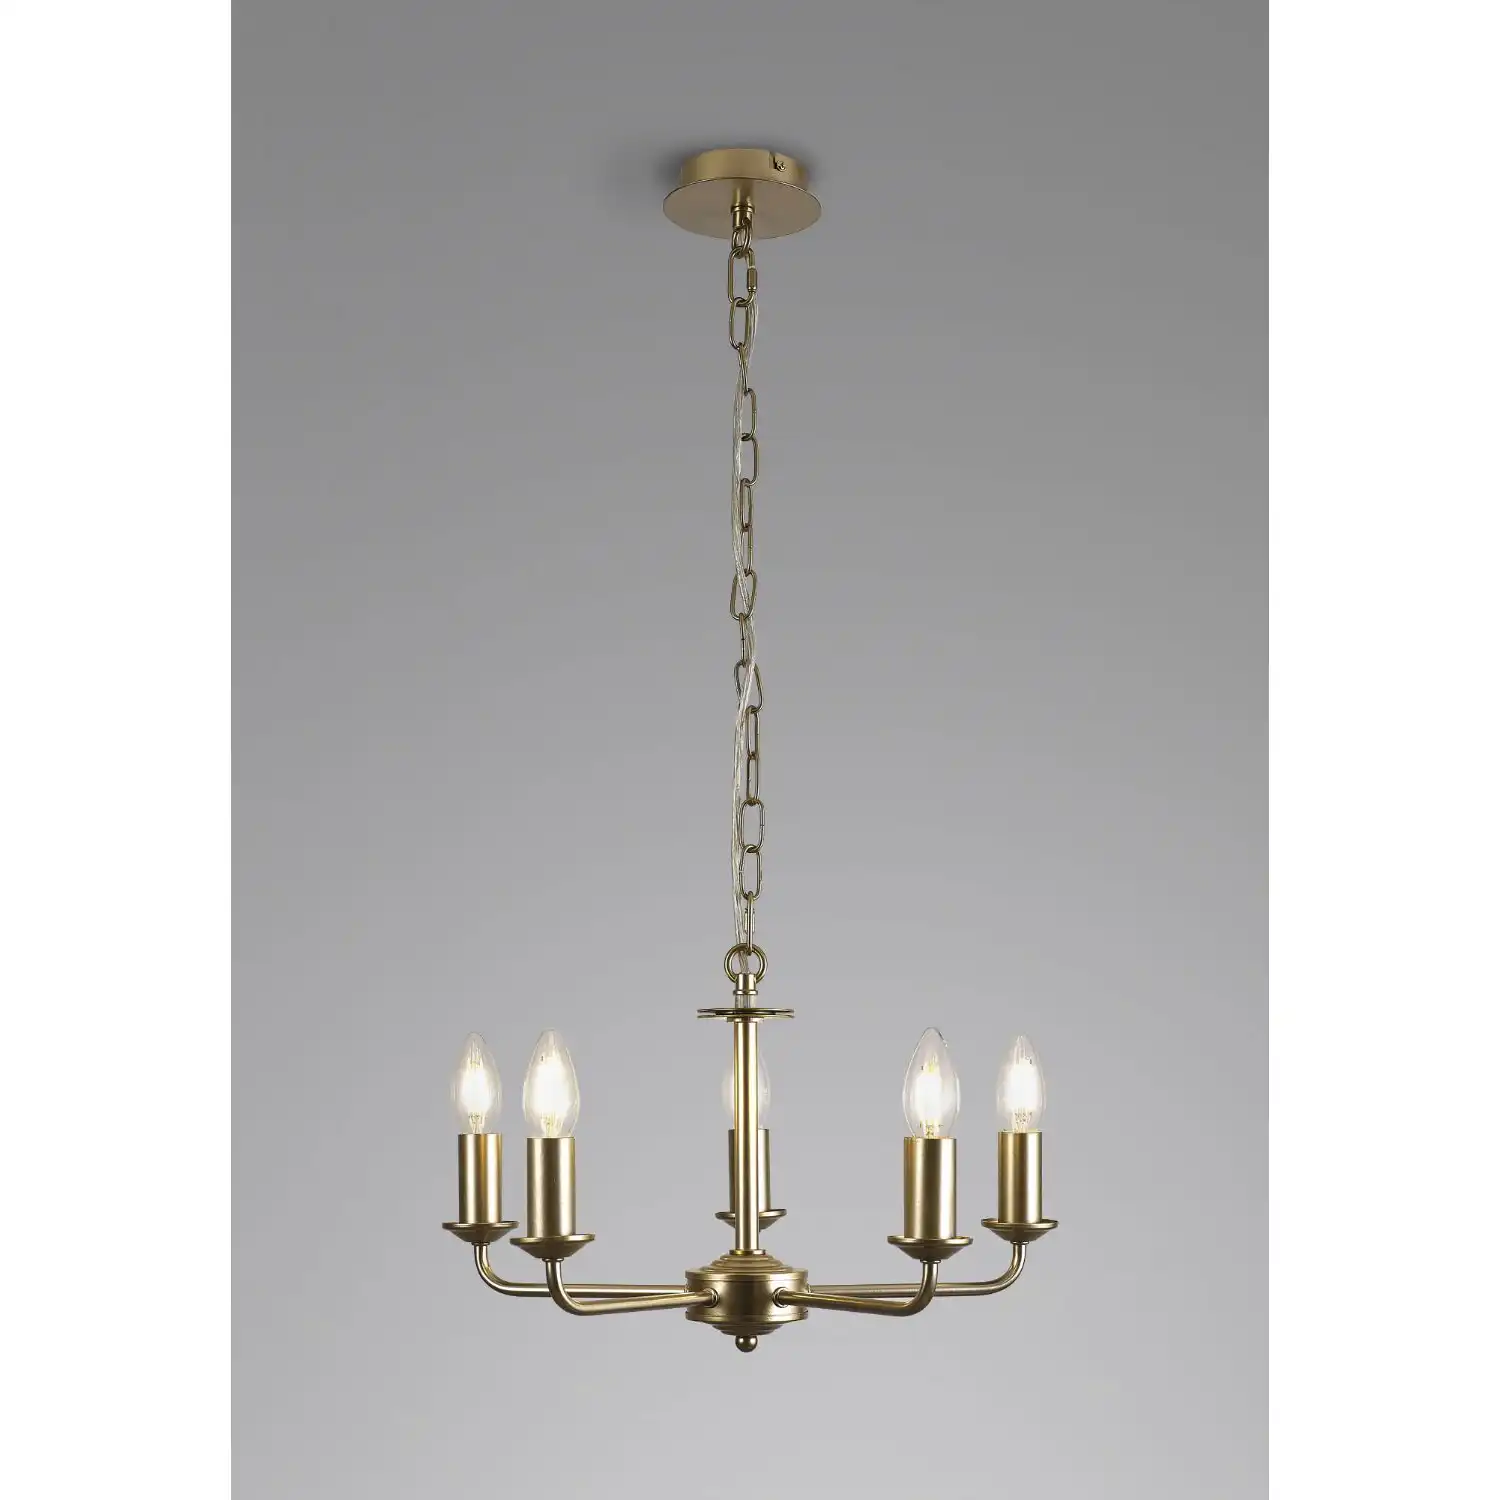 Banyan 5 Light Multi Arm Pendant Without Shade, c w 1.5m Chain, E14 Painted Champagne Gold